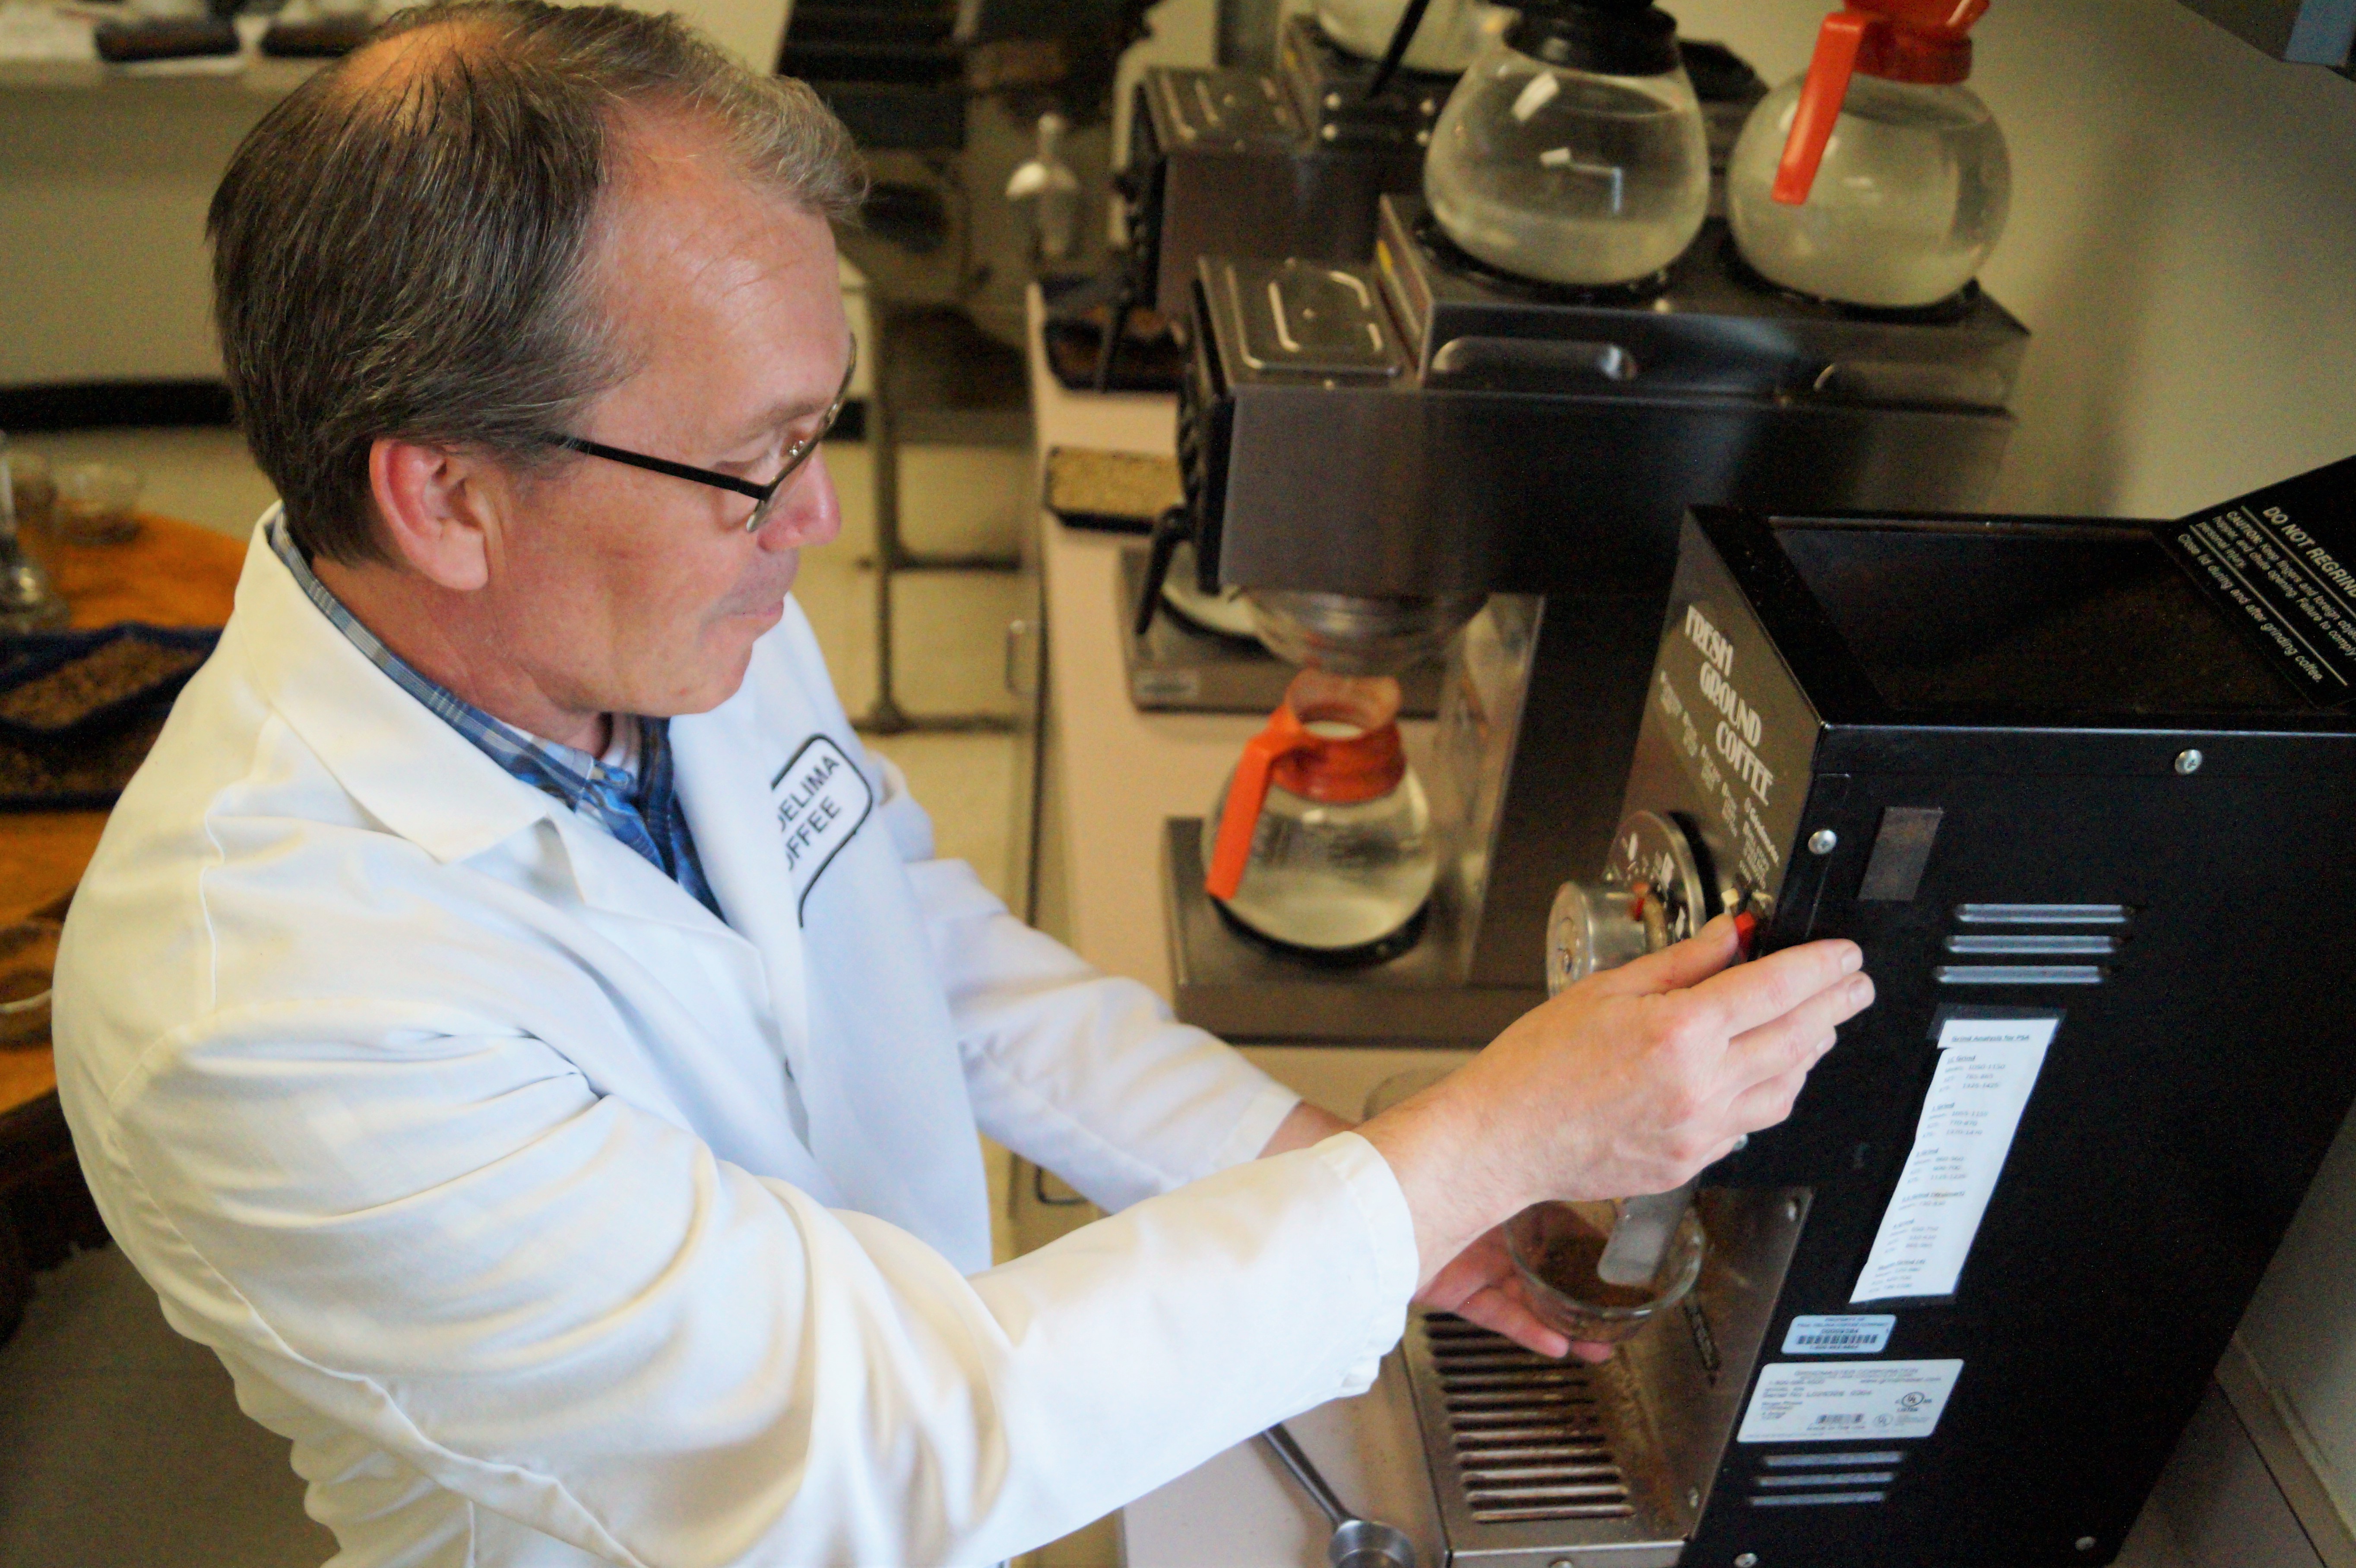 Glenn grinds coffee beans in preparation for tasting during the cupping process.